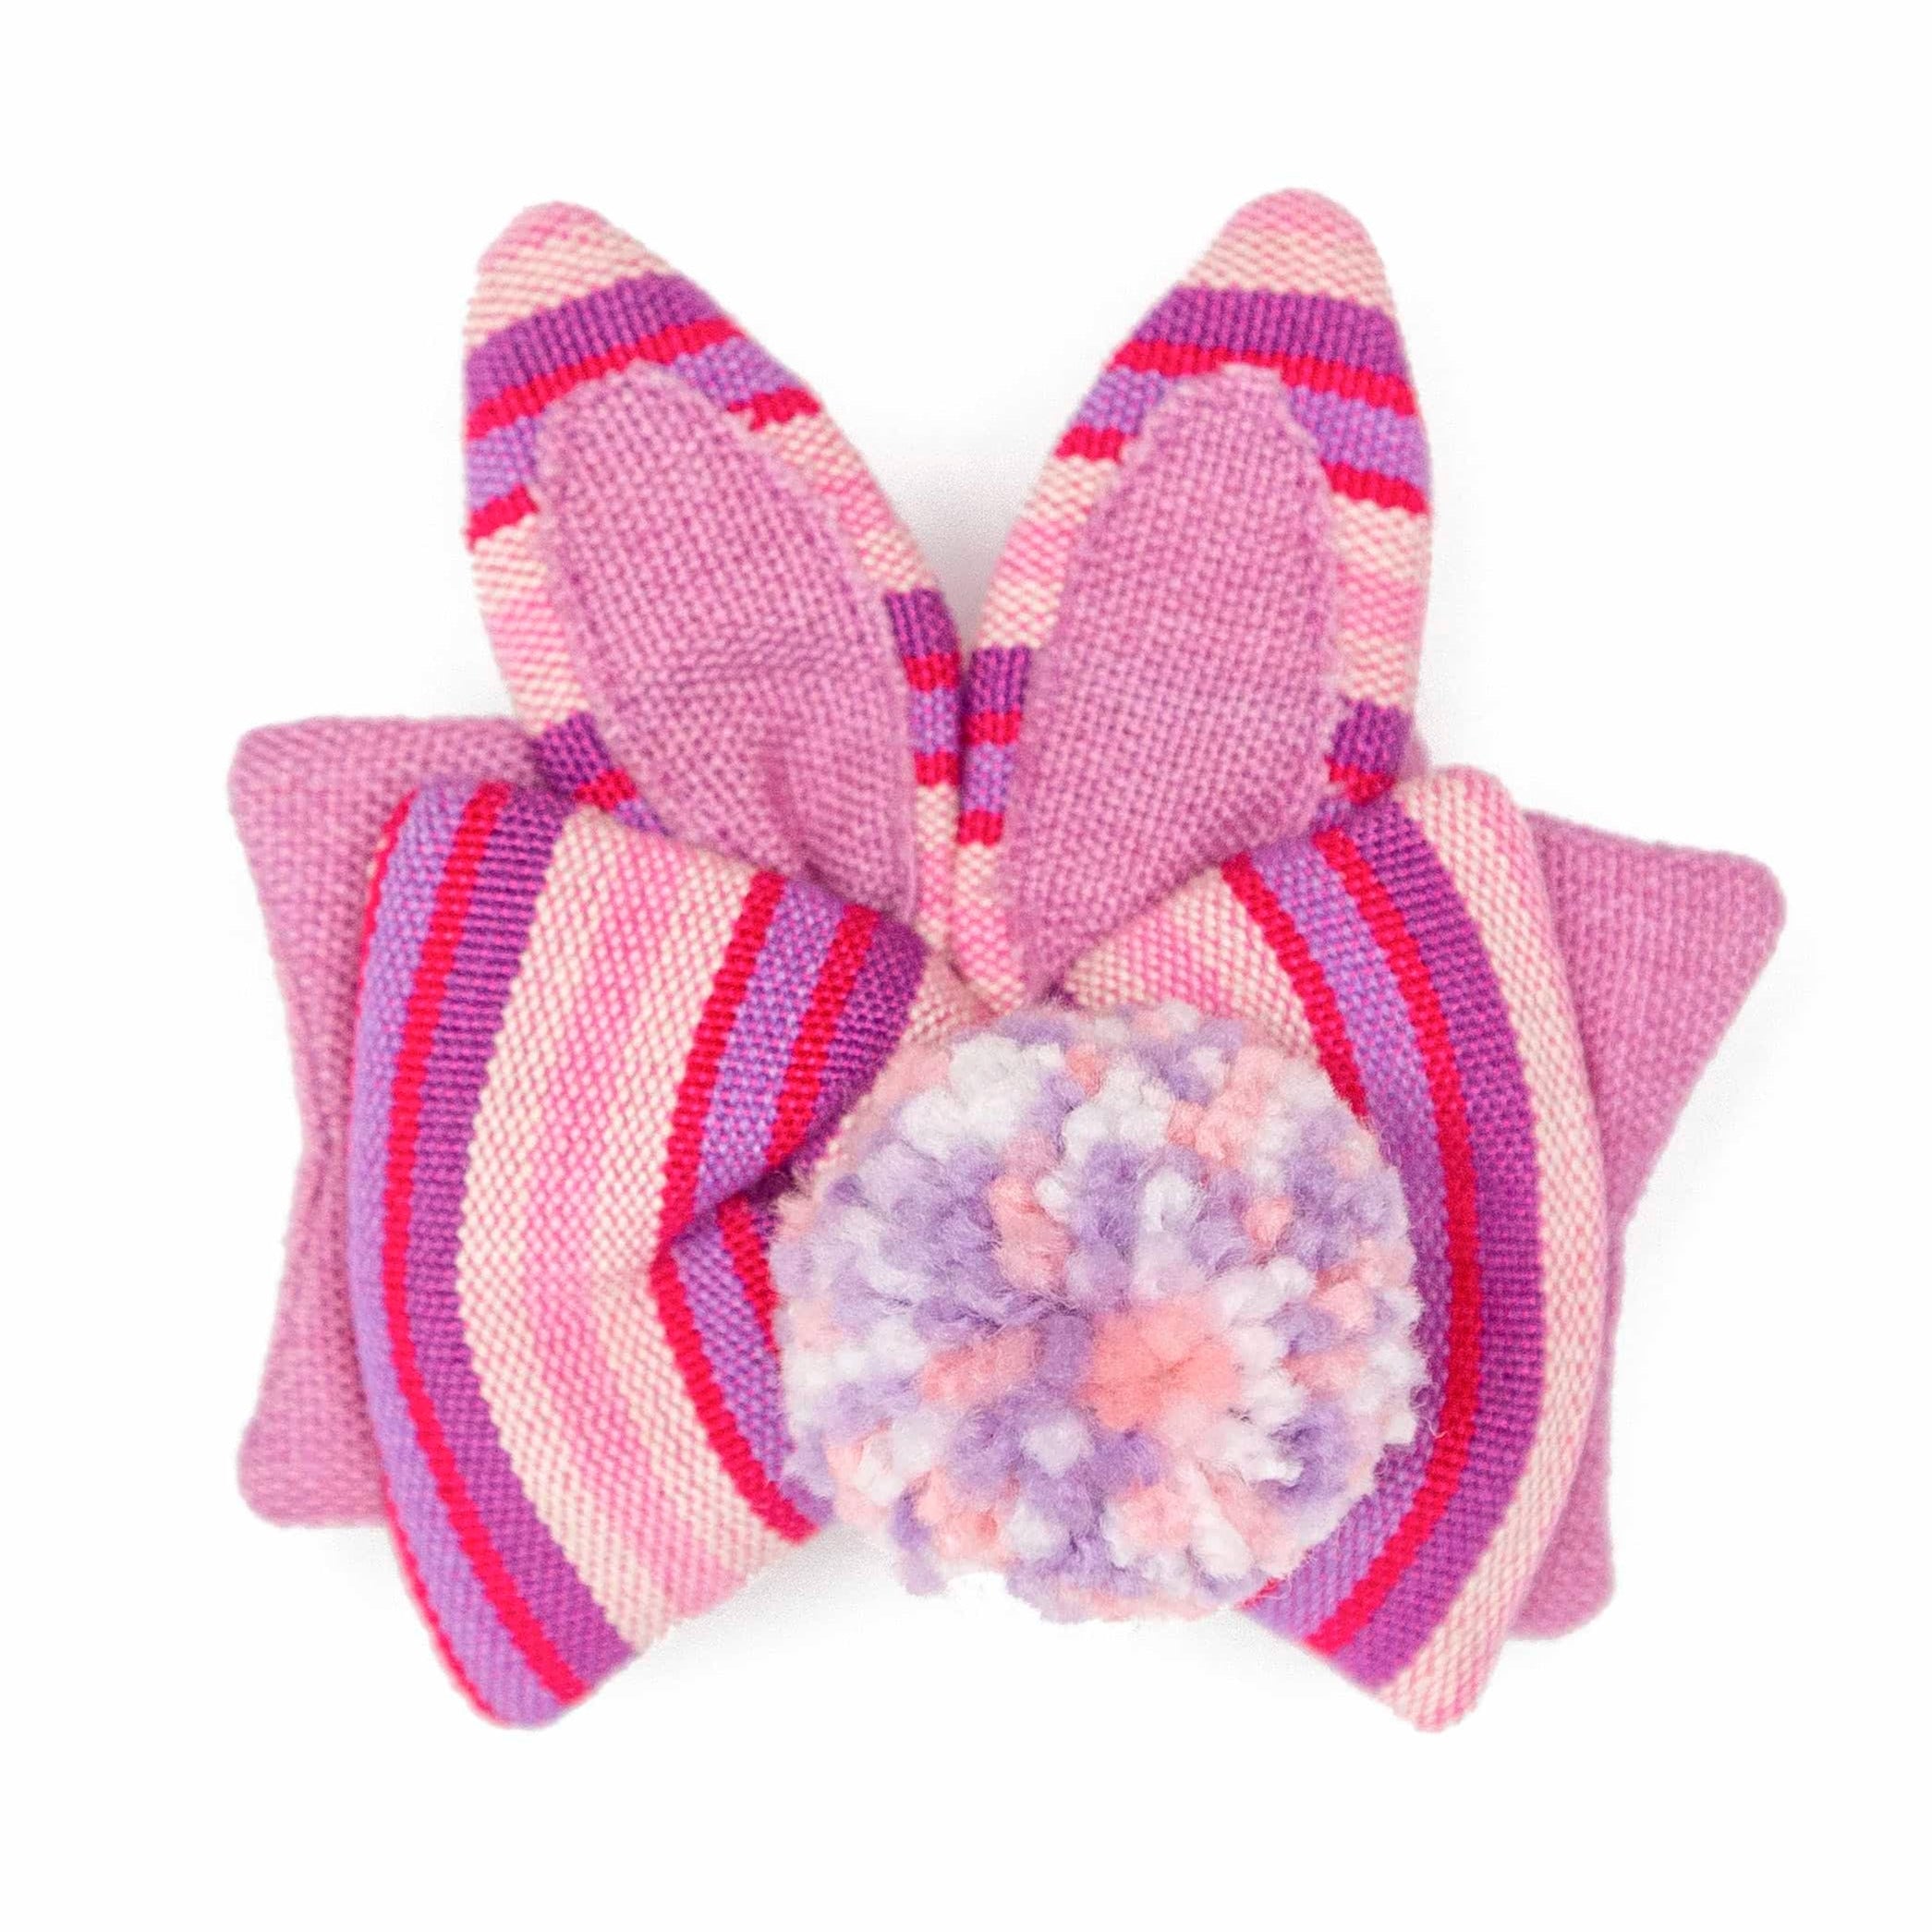 Little Bunny Fair Trade and Handmade Our new Little Bunny Scrunchies are a unique variation of our best-selling traditional and are sure to look cute in your little one's hair or yours! Featuring a dual bow with a fuzzy pom-pom and two cute rabbit ears, these scrunchies are a must-have for Spring! Choose between a beautiful pink or a vibrant peach color. As always, Handmade and Fair Trade!